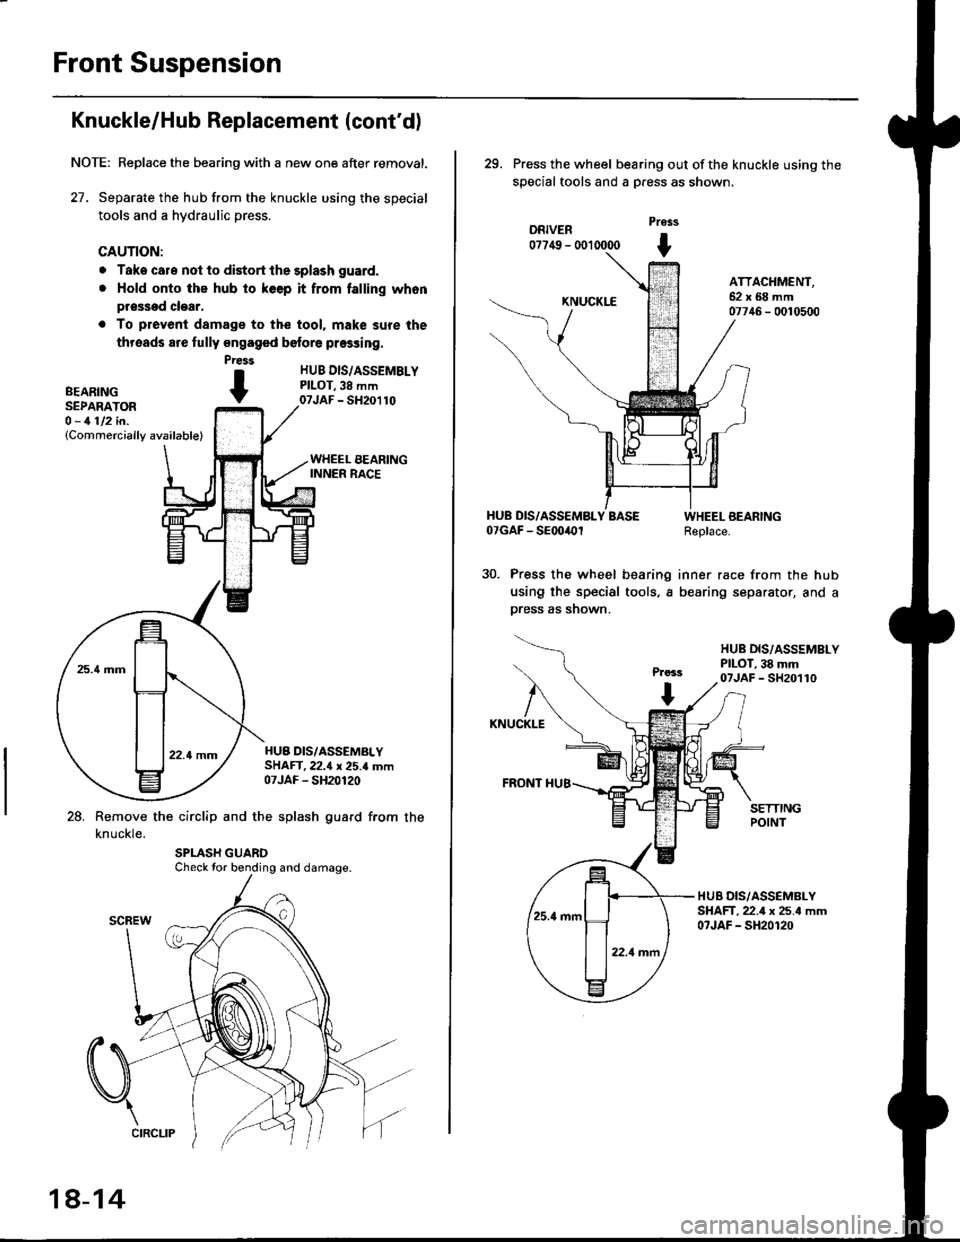 HONDA CIVIC 1998 6.G Workshop Manual Front Suspension
Knuckle/Hub Replacement (contdl
NOTE: Replace the bearing with a new one after removal.
27. Separate the hub from the knuckle using the special
tools and a hydraulic press.
CAUTION:
